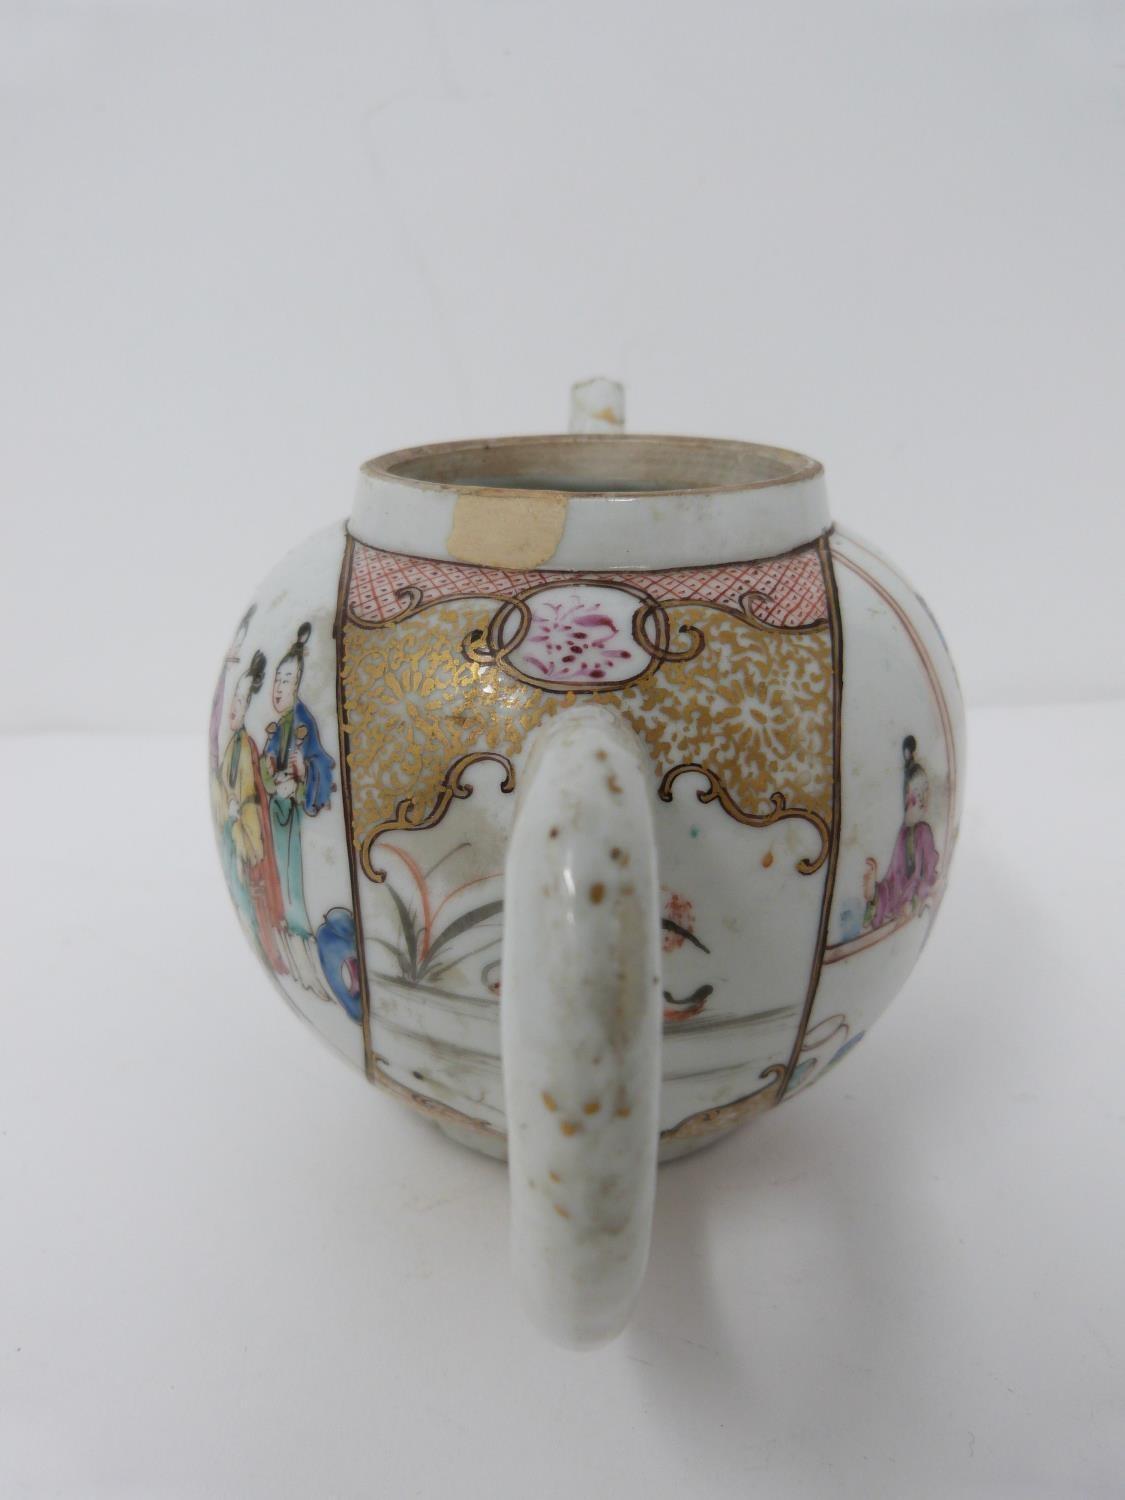 A late 18th century Chinese export wear porcelain teapot with painted figures and gilded floral - Image 2 of 12